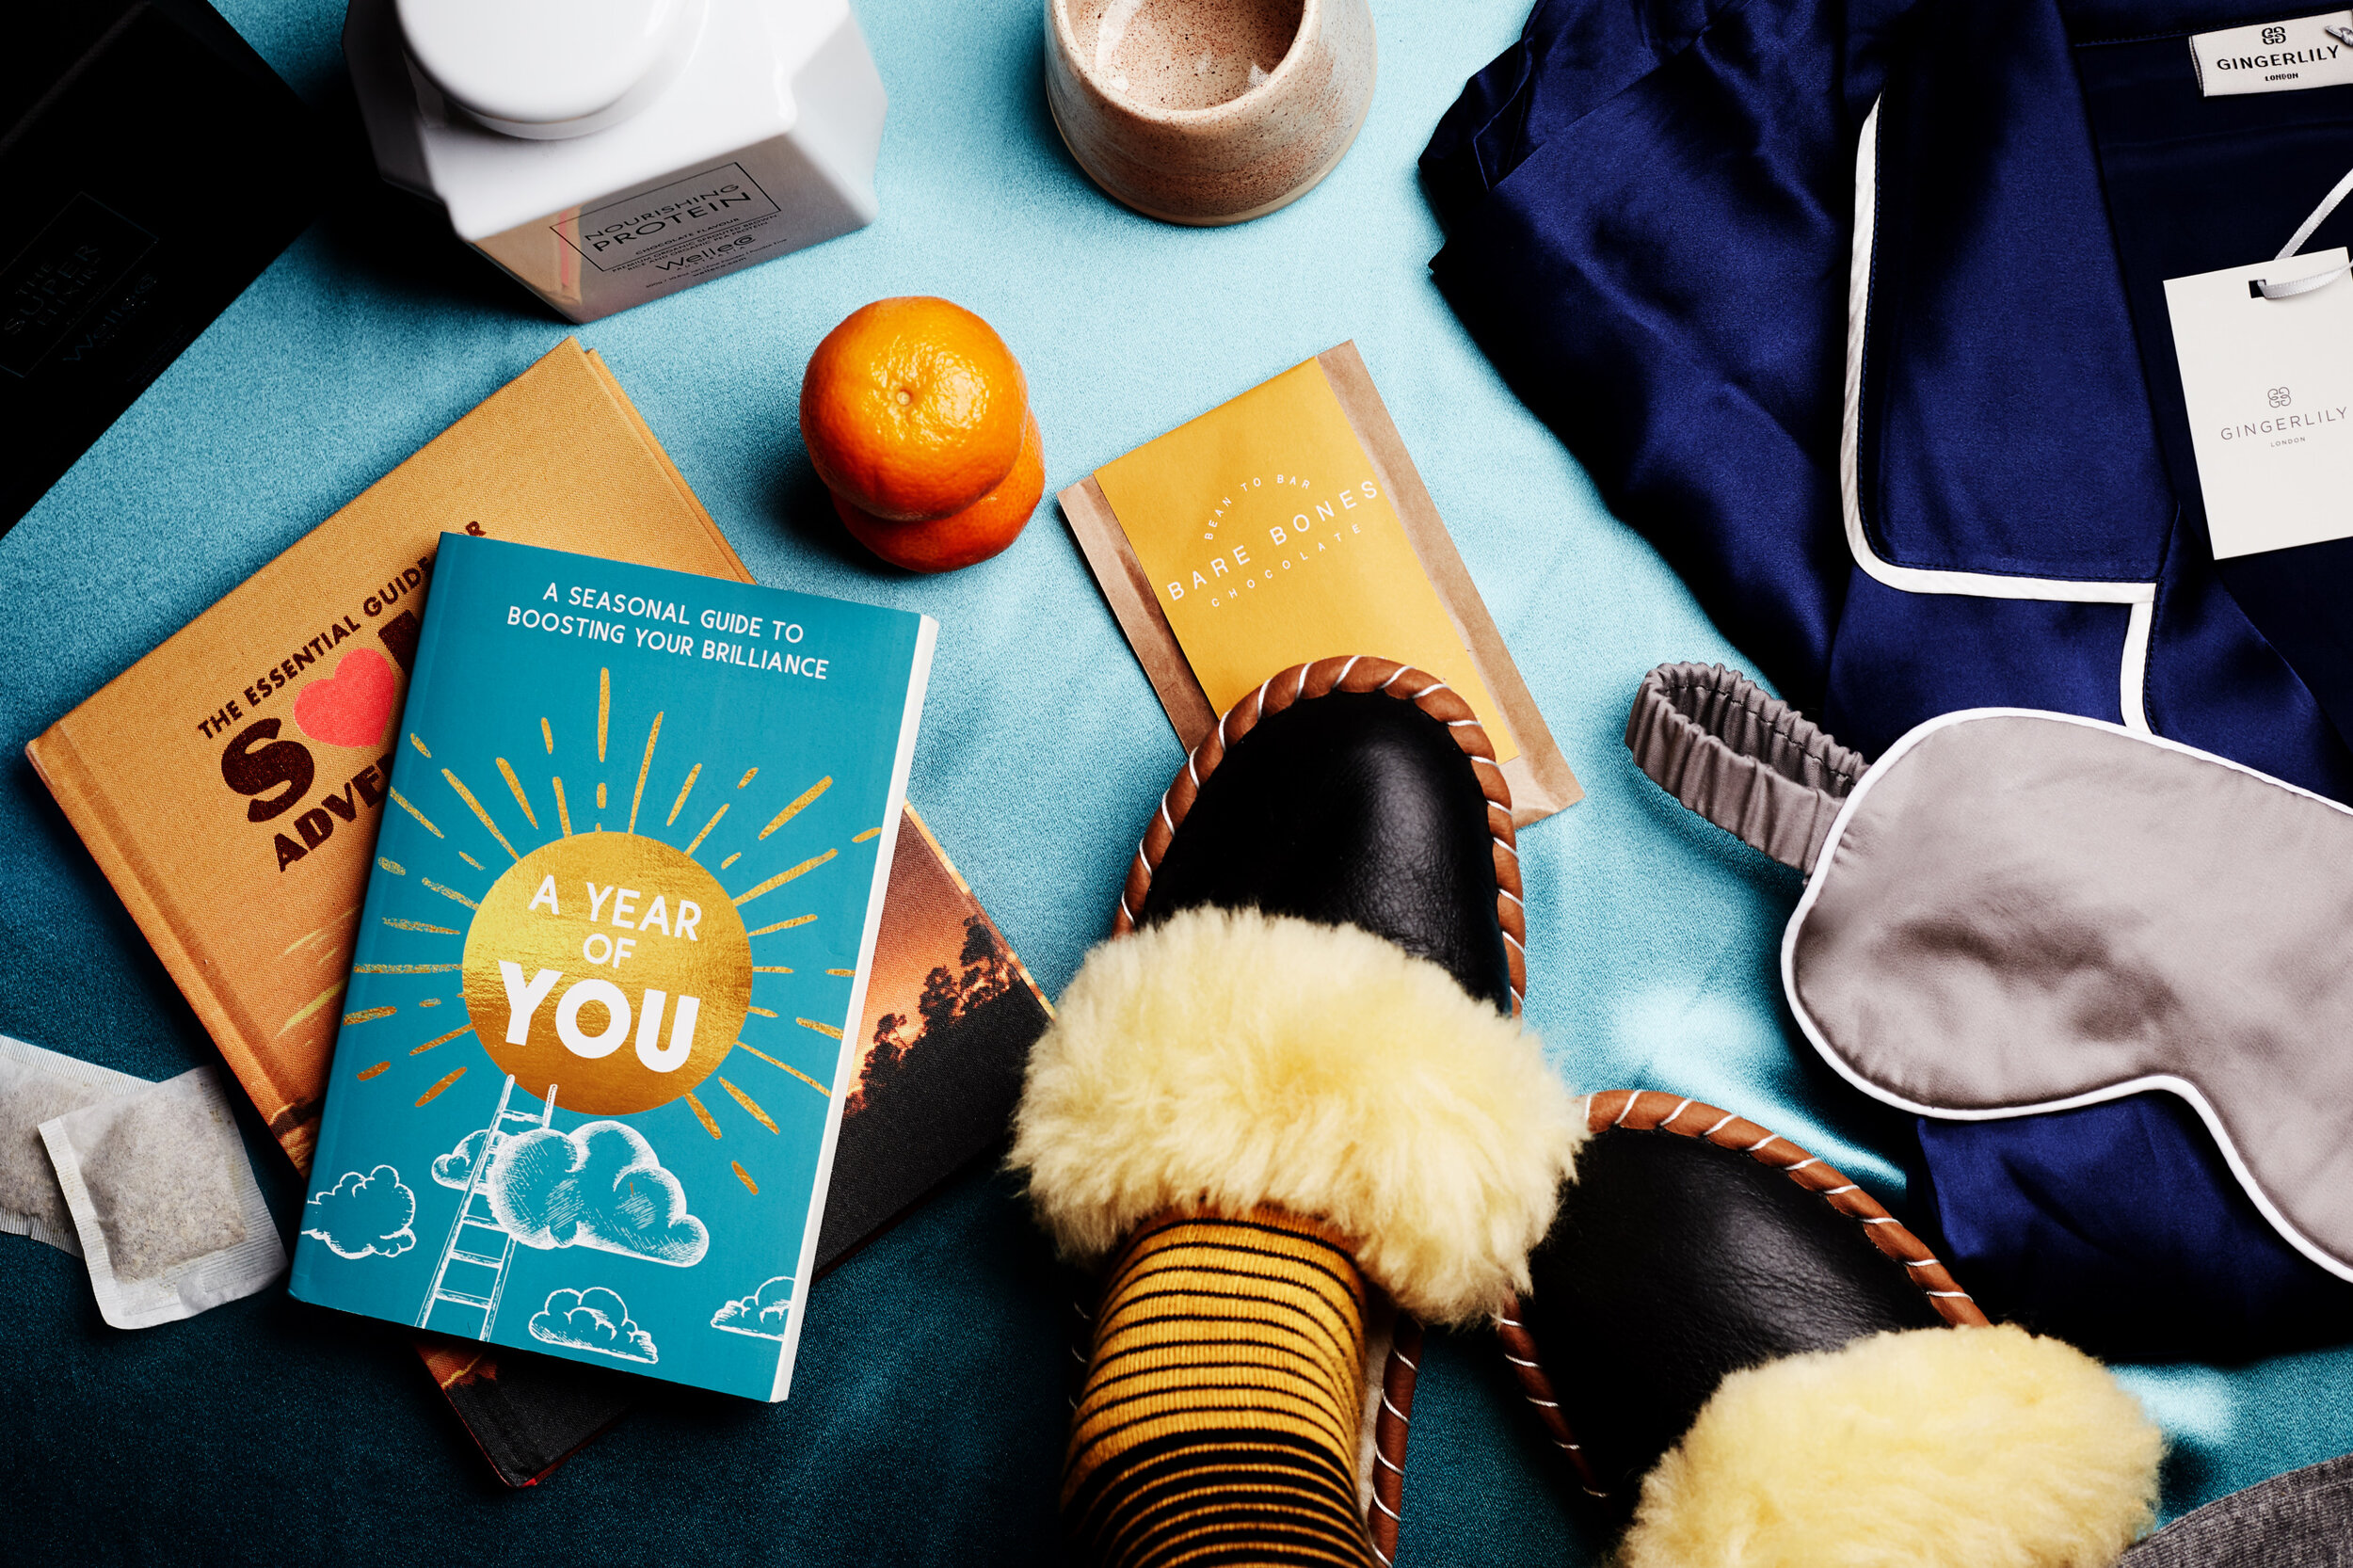  SOUL ADVENTURES  The Essential Guide  €180  A YEAR OF YOU  A Seasonal Guide to Boosting Your Brilliance  £6.99  WYLDE COLLECTIVE  Terra Matte Tumbler  £24 @ Zero-Living  BARE BONES  Madagascar 70% Dark Chocolate  from £9  ONAIE  Tiramisu Sheepskin M